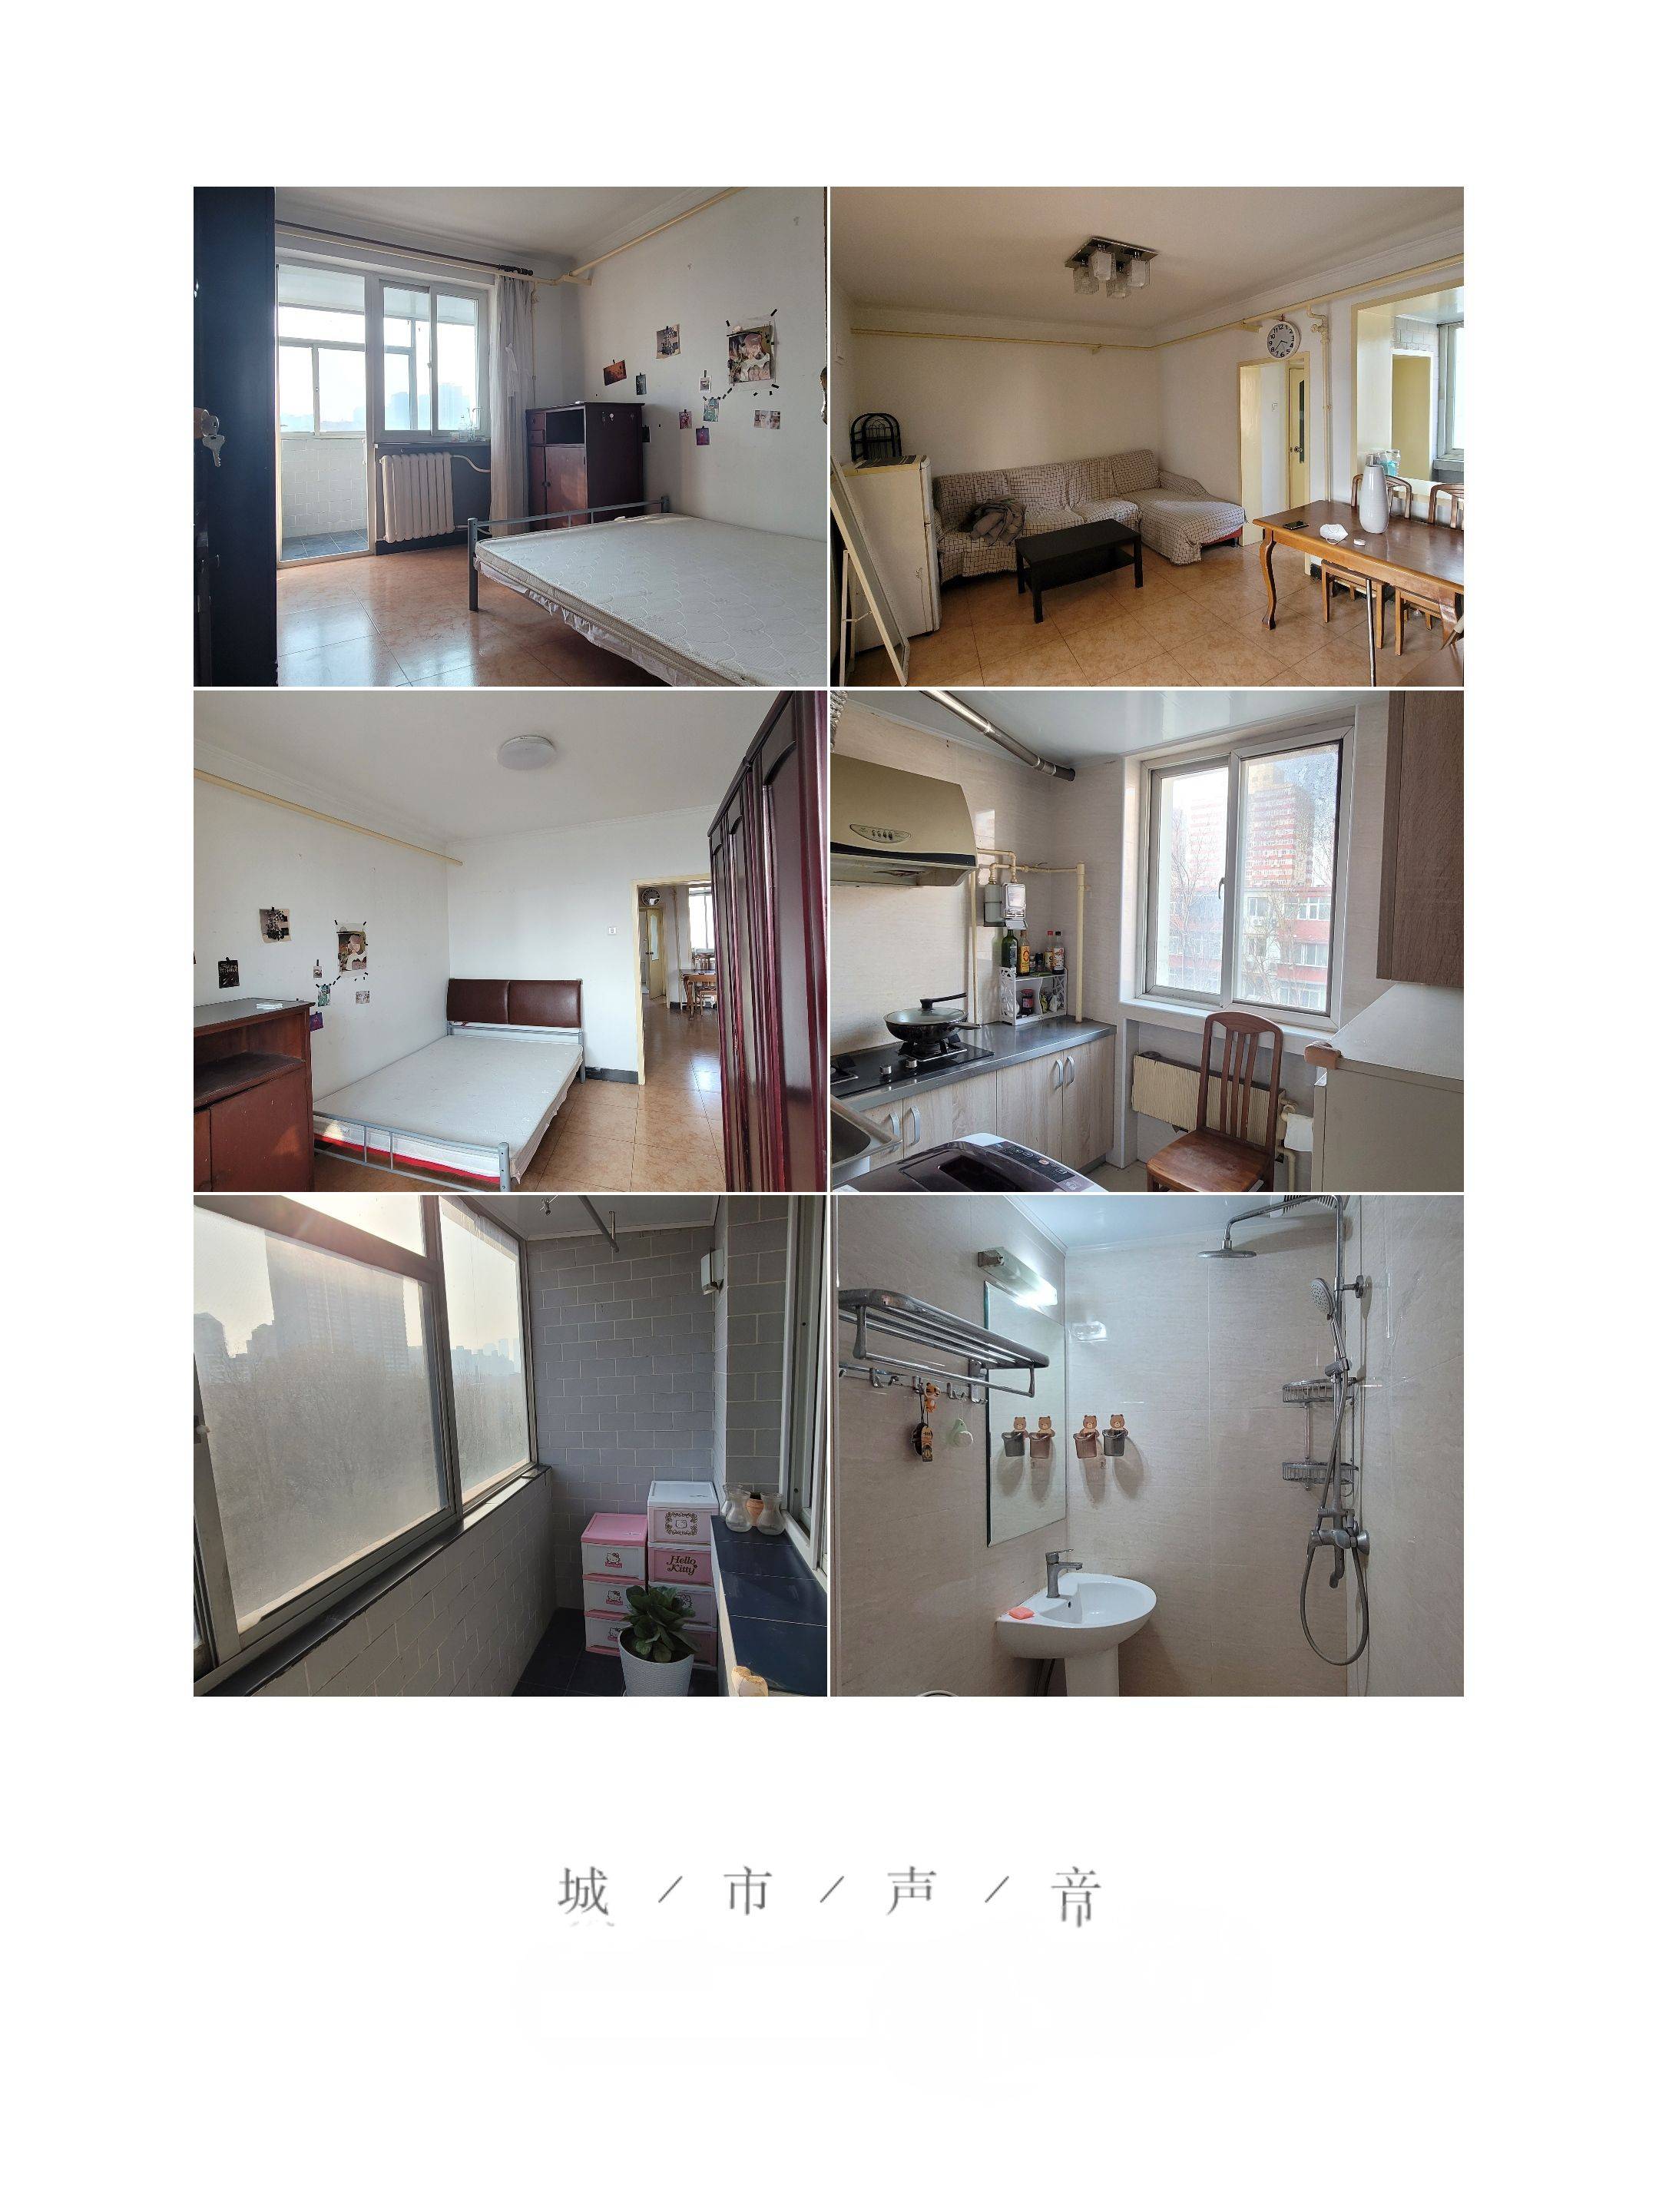 Beijing-Chaoyang-Cozy Home,No Gender Limit